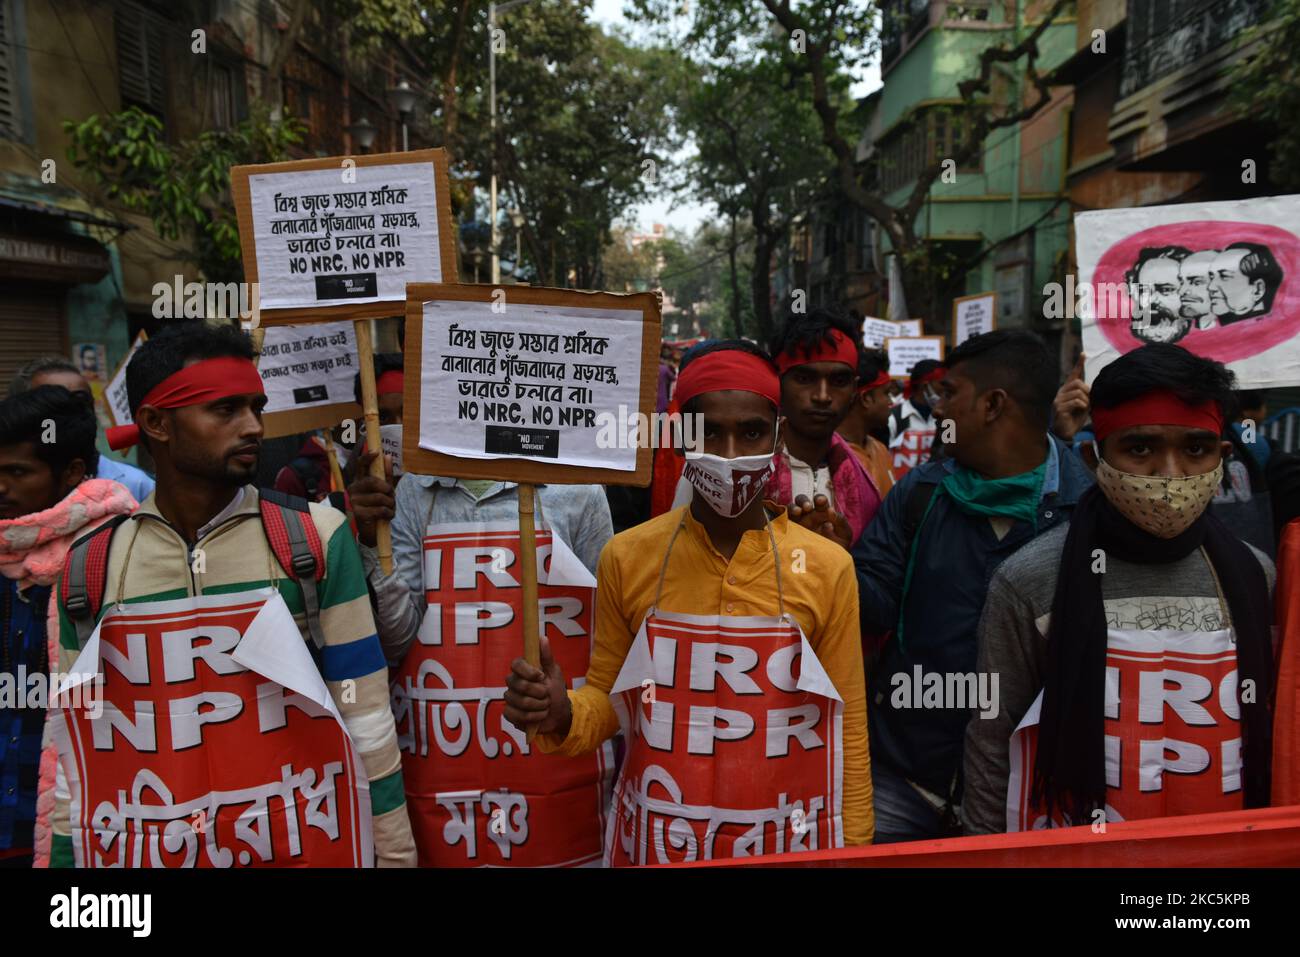 People take part in a demonstration against the controversial Citizenship Amendment Act, in Kolkata, India, on December 11, 2020. One year ago, on December 11th 2019, India's parliament passed the controversial Citizenship Amendment Act introduced by Mr. Amit Shah, Minister of Home Affairs. (Photo by Sukhomoy Sen/NurPhoto) Stock Photo